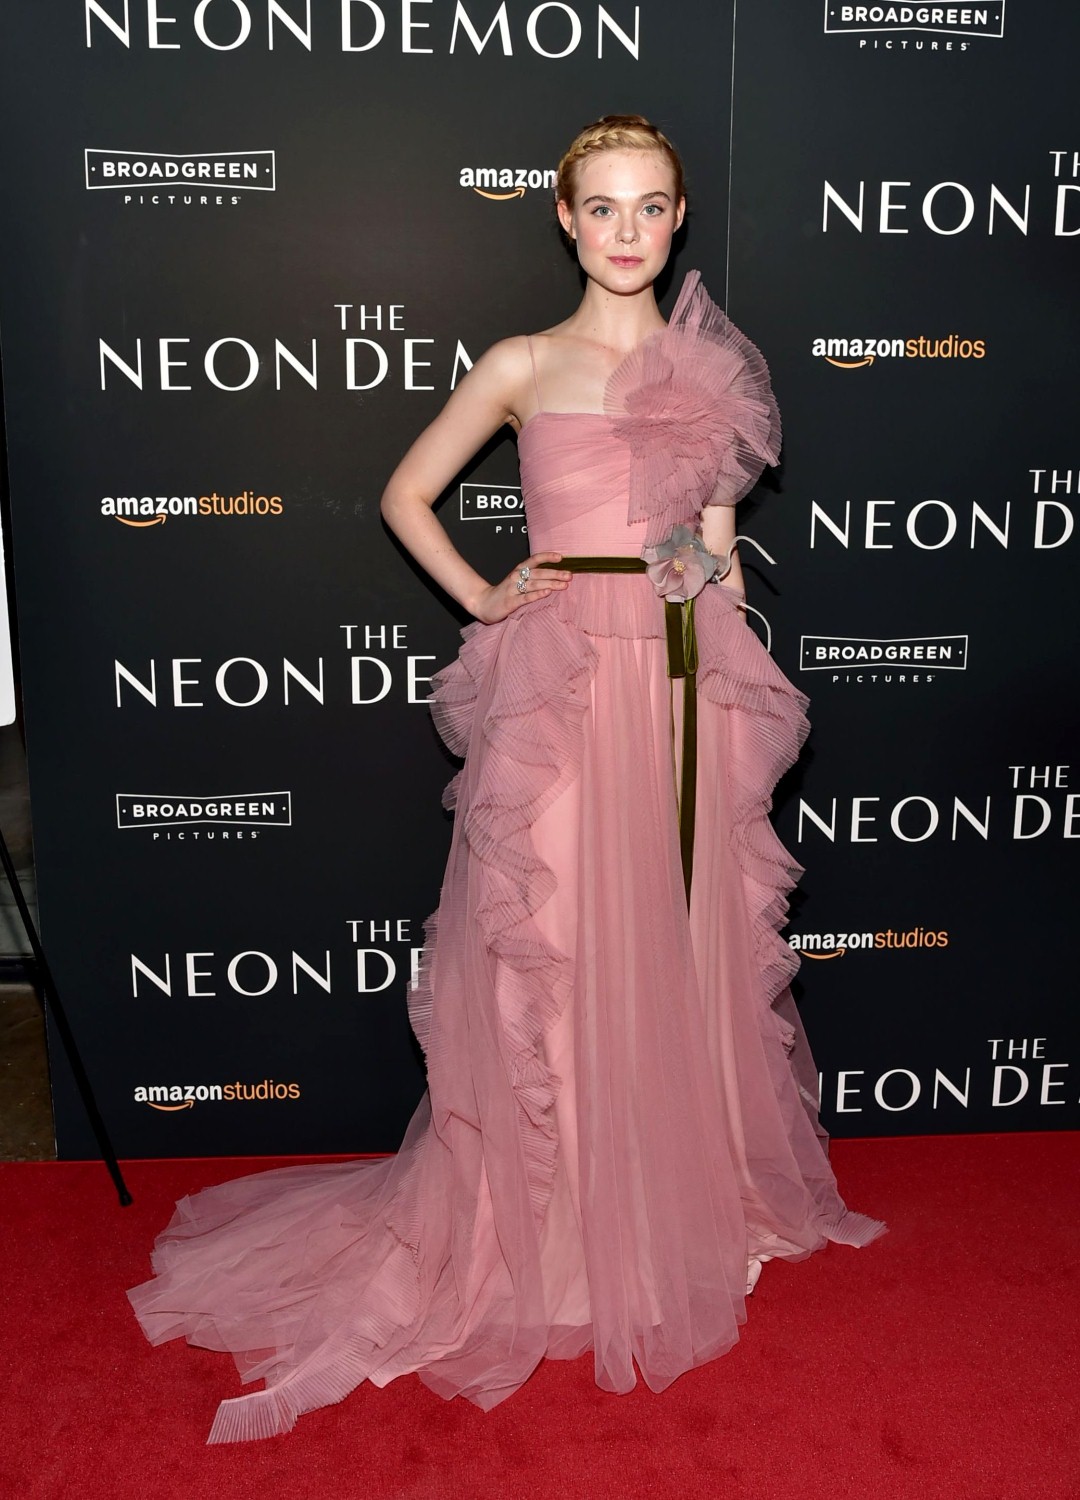 Elle Fanning attend 'The Neon Demon' Premiere at Metrograph in New York City_02 (Large).jpg